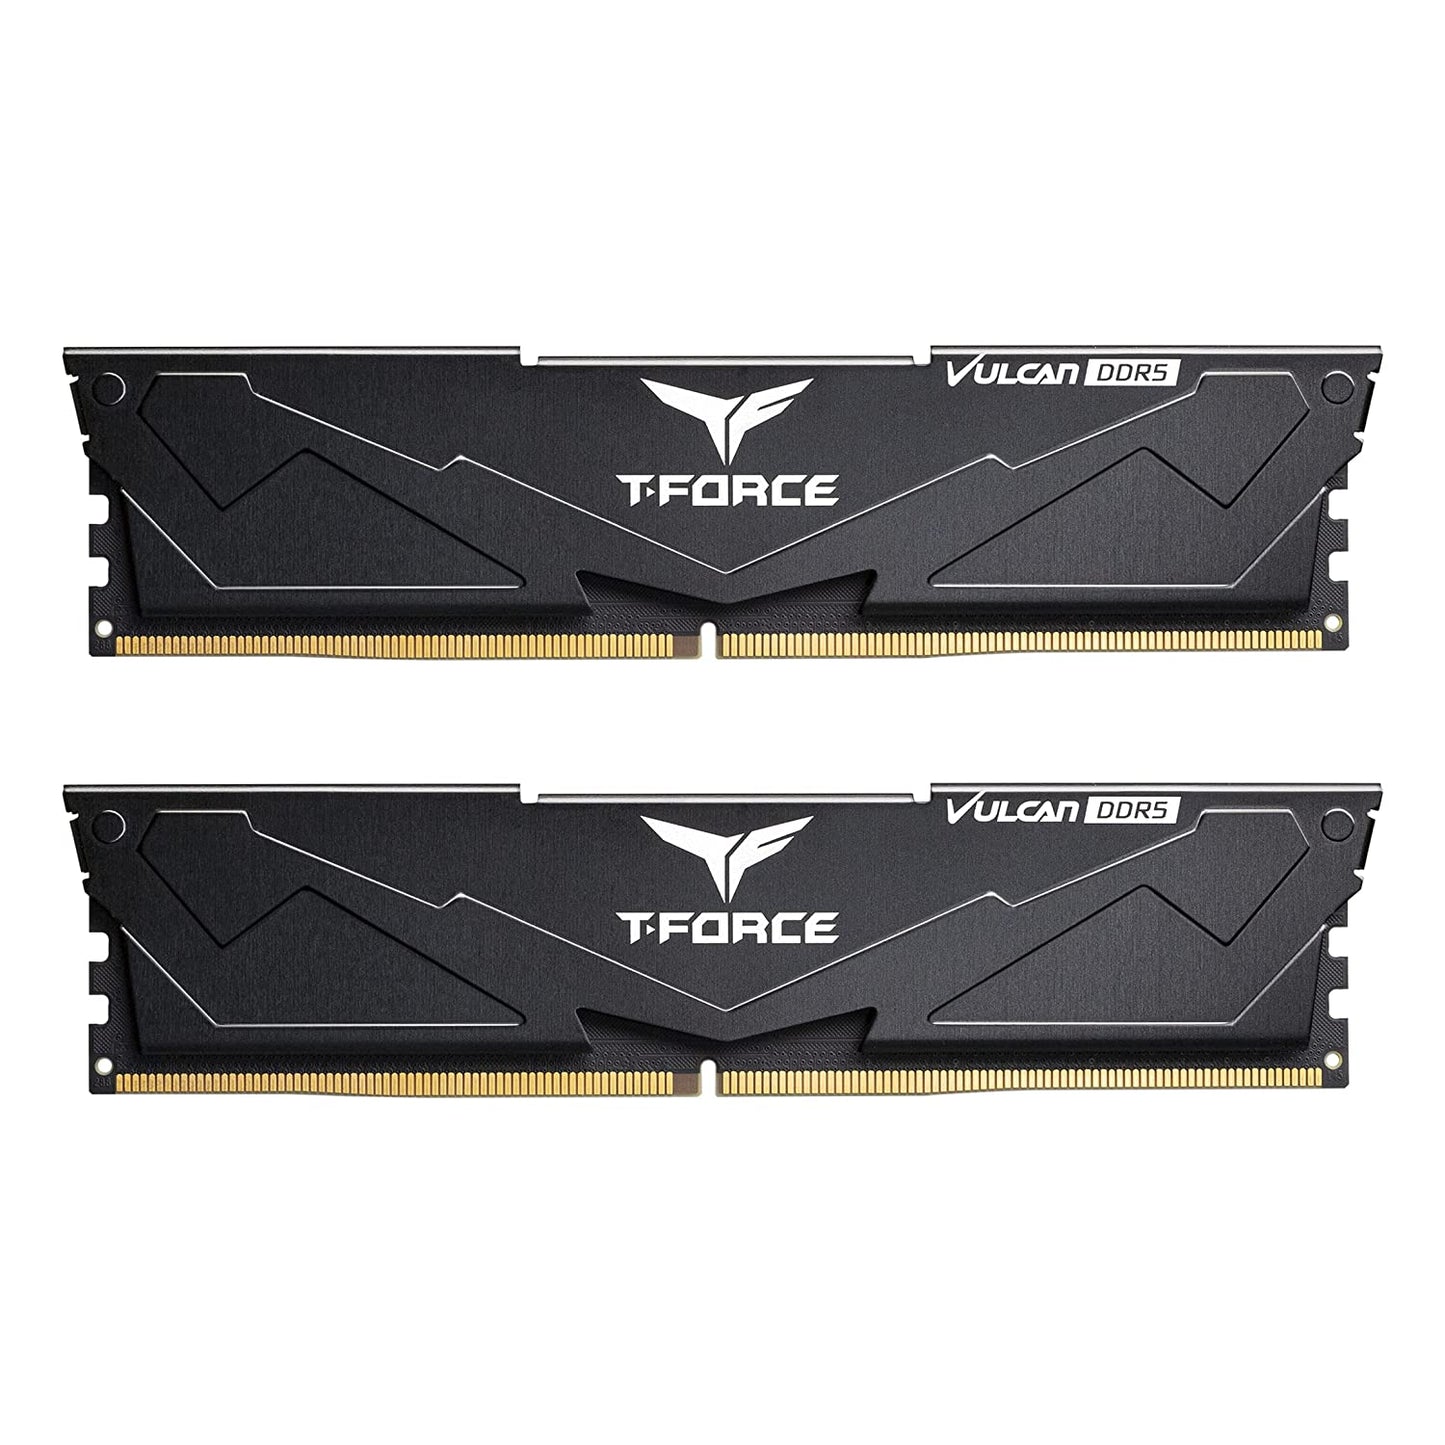 TEAMGROUP T-Force Vulcan DDR5 16GB Kit (2x8GB) 5200MHz (PC5-41600) CL40 Desktop Memory Module Ram (Black) for 600 Series Chipset